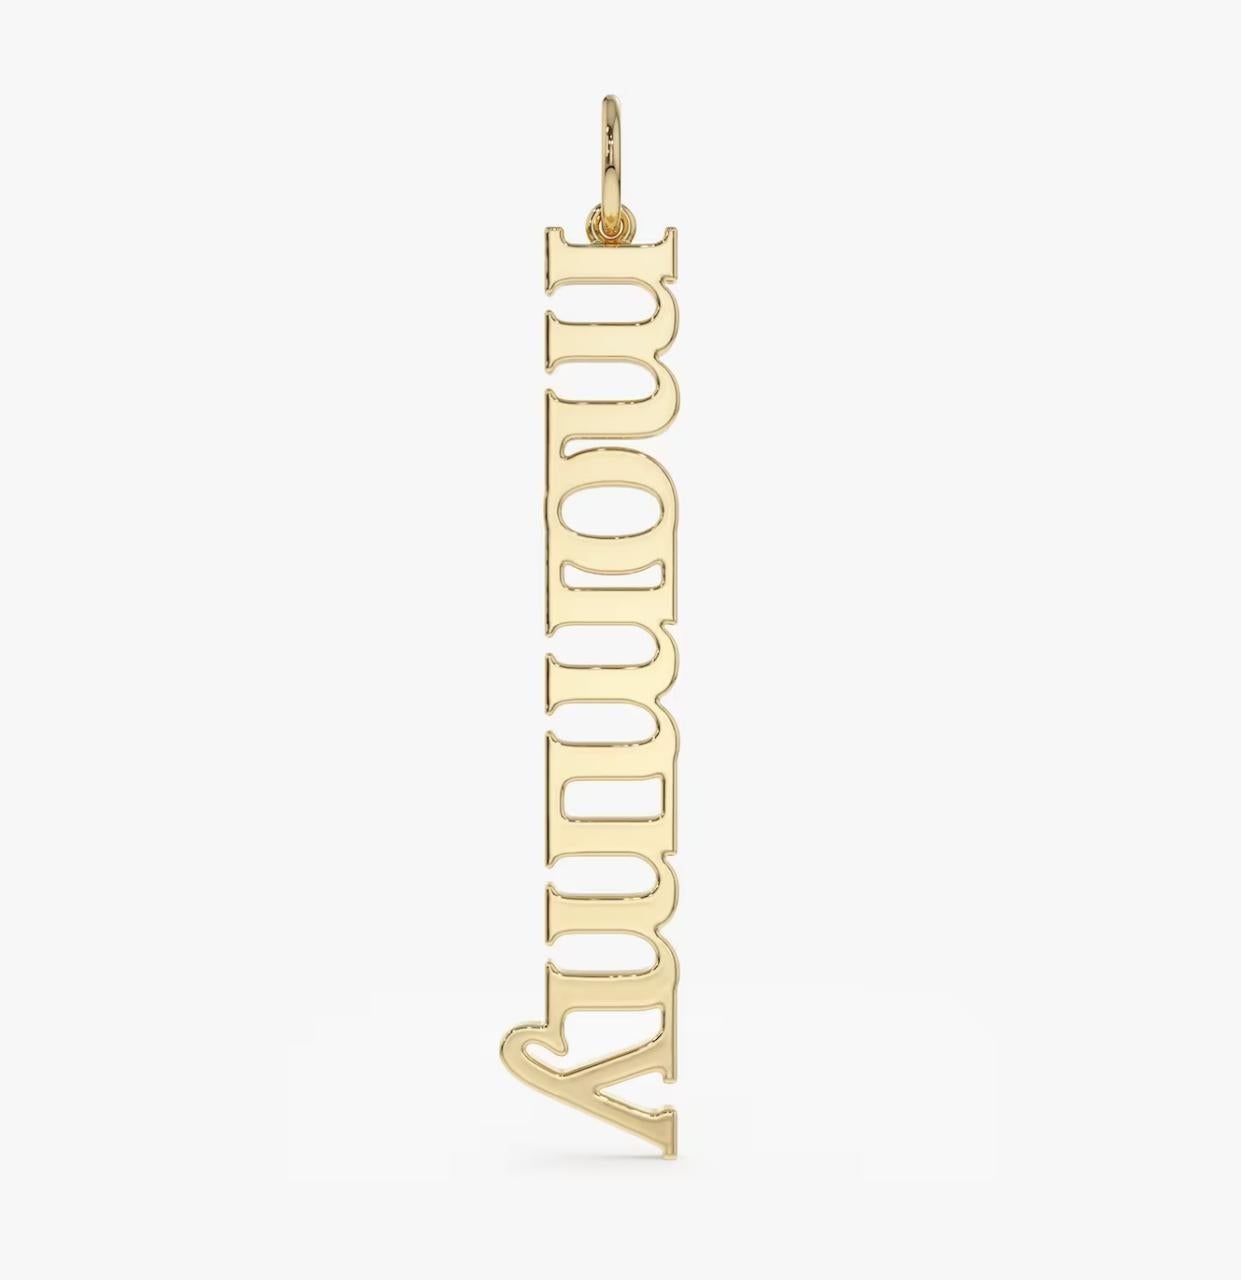 Necklace Information
Metal : 14k
Metal Color : Yellow Gold
Dimensions : 5X33MM
Length : 18 Inches
Lead Time : 4-8 Weeks (If out of Stock)


JEWELRY CARE
Over the course of time, body oil and skin products can collect on Jewelry and leave a residue